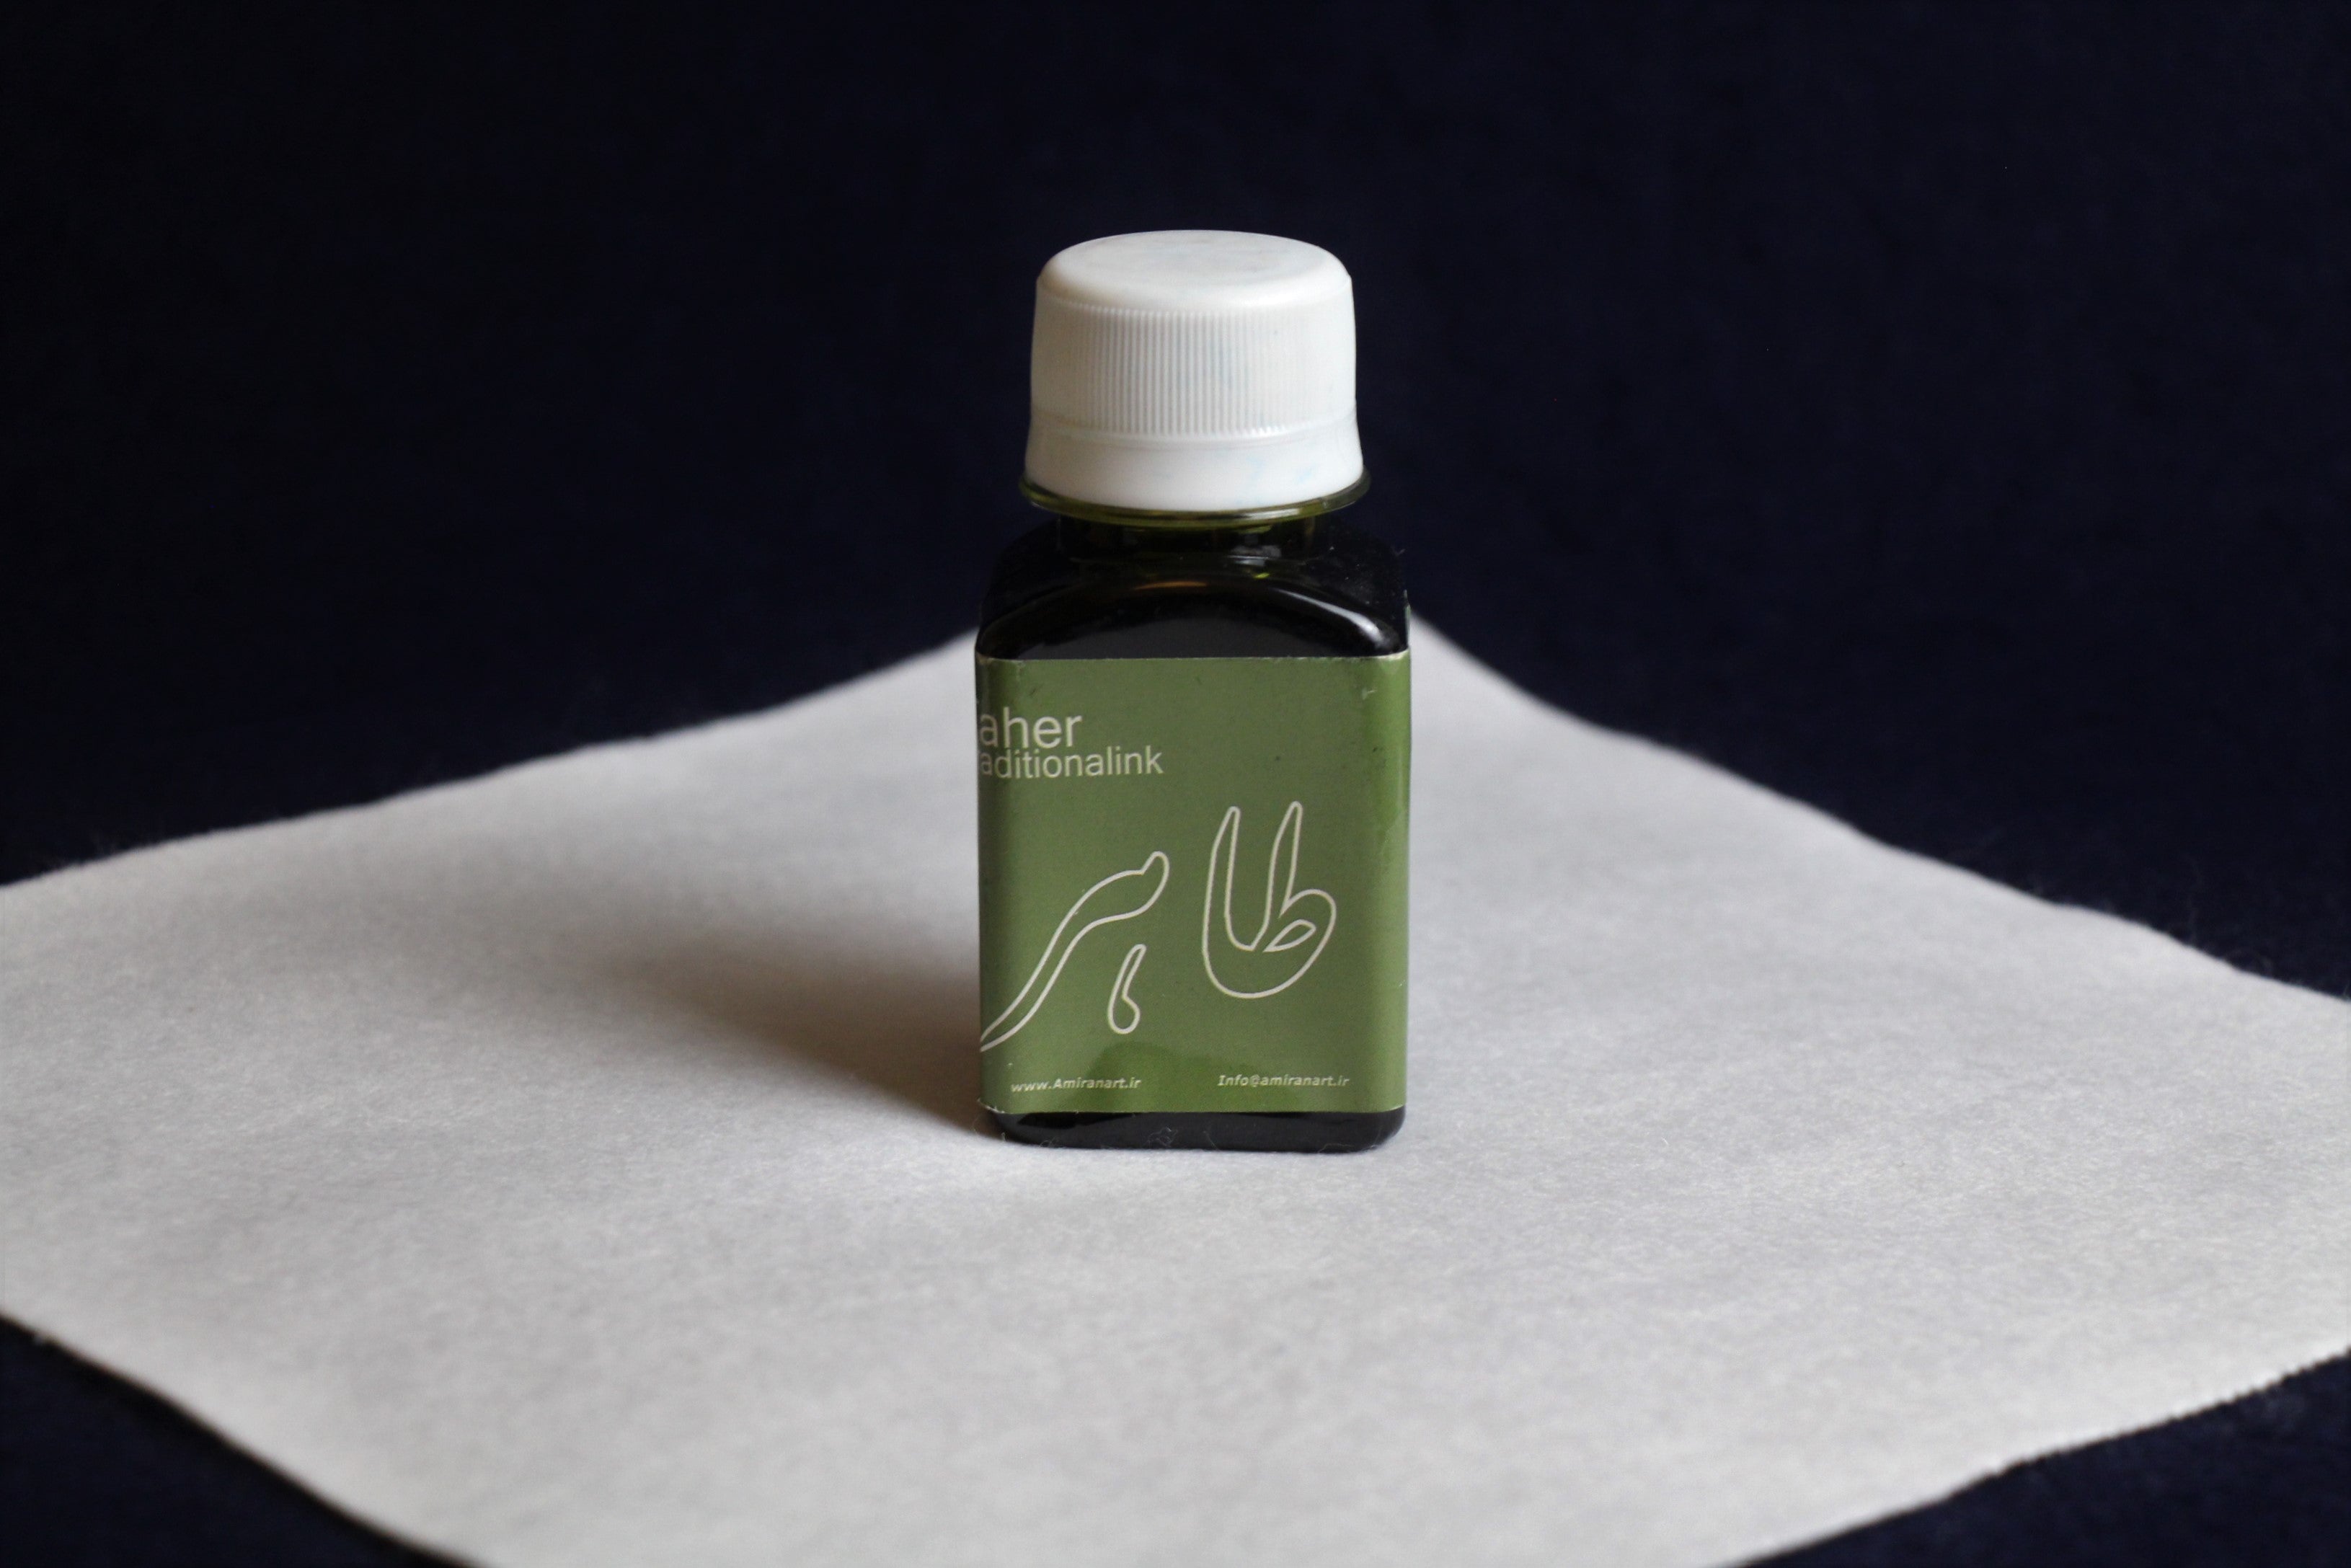 Taher traditional ink for Arabic calligraphy - olive green